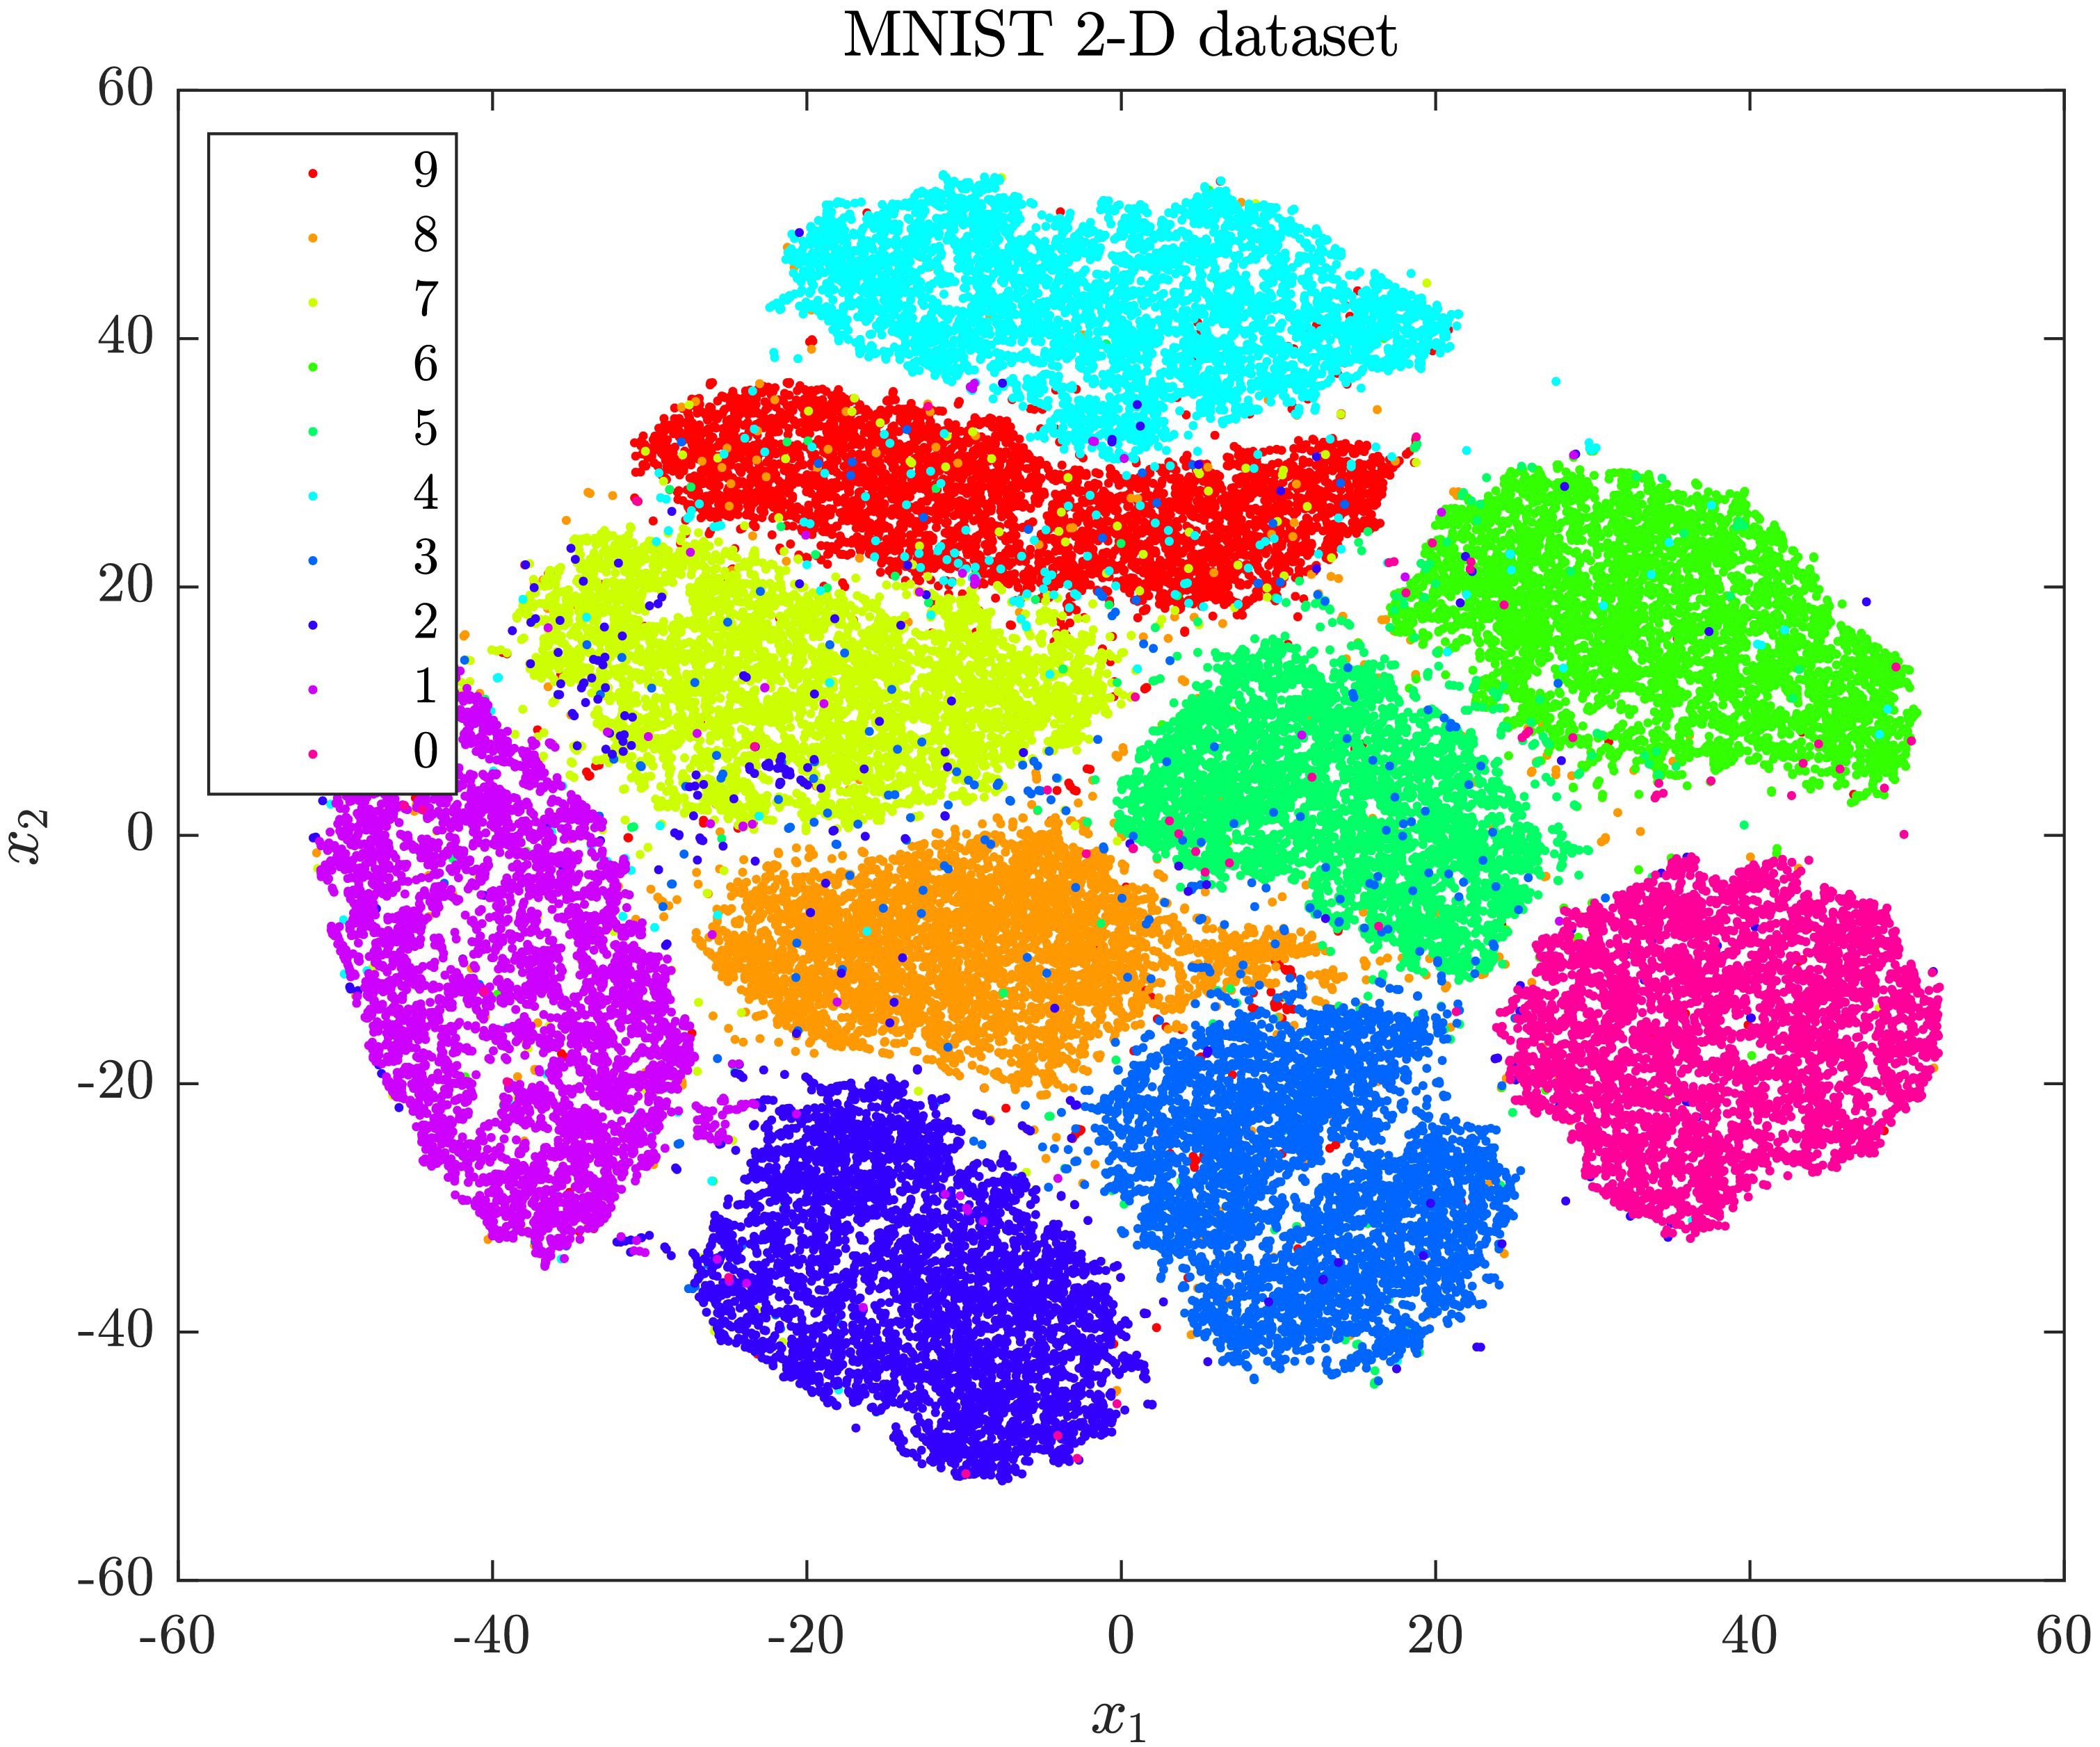 MNIST 2-D visualization using the t-SNE implementation from scikit-learn.